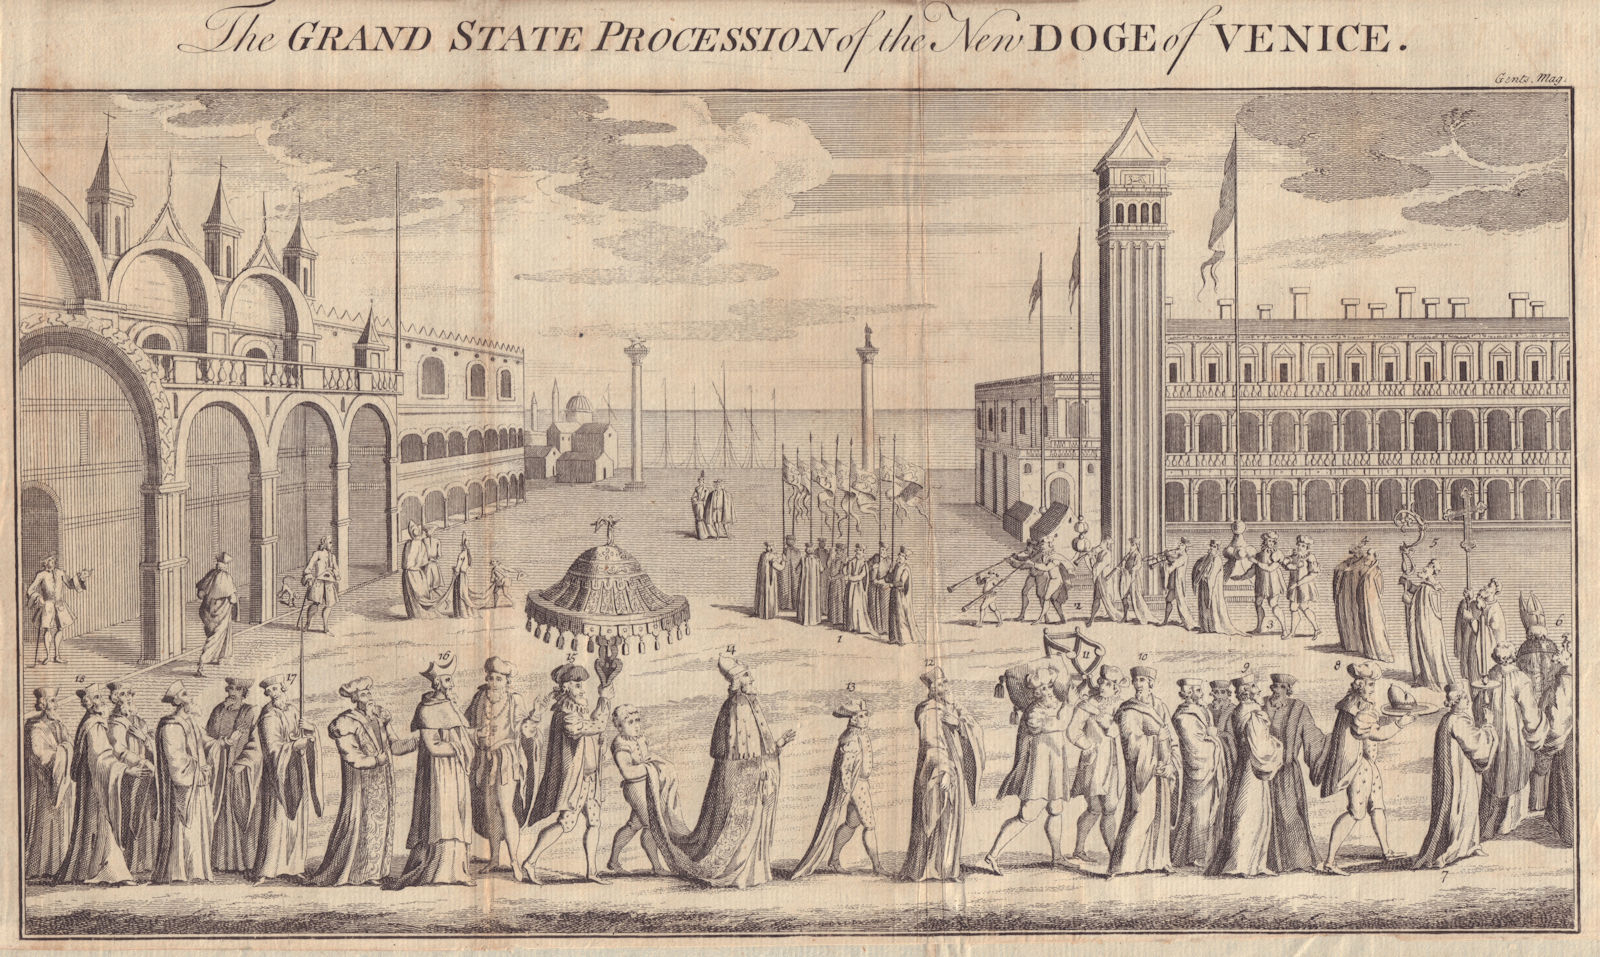 The Grand State Procession of the New Doge of Venice. St Mark's Square 1752